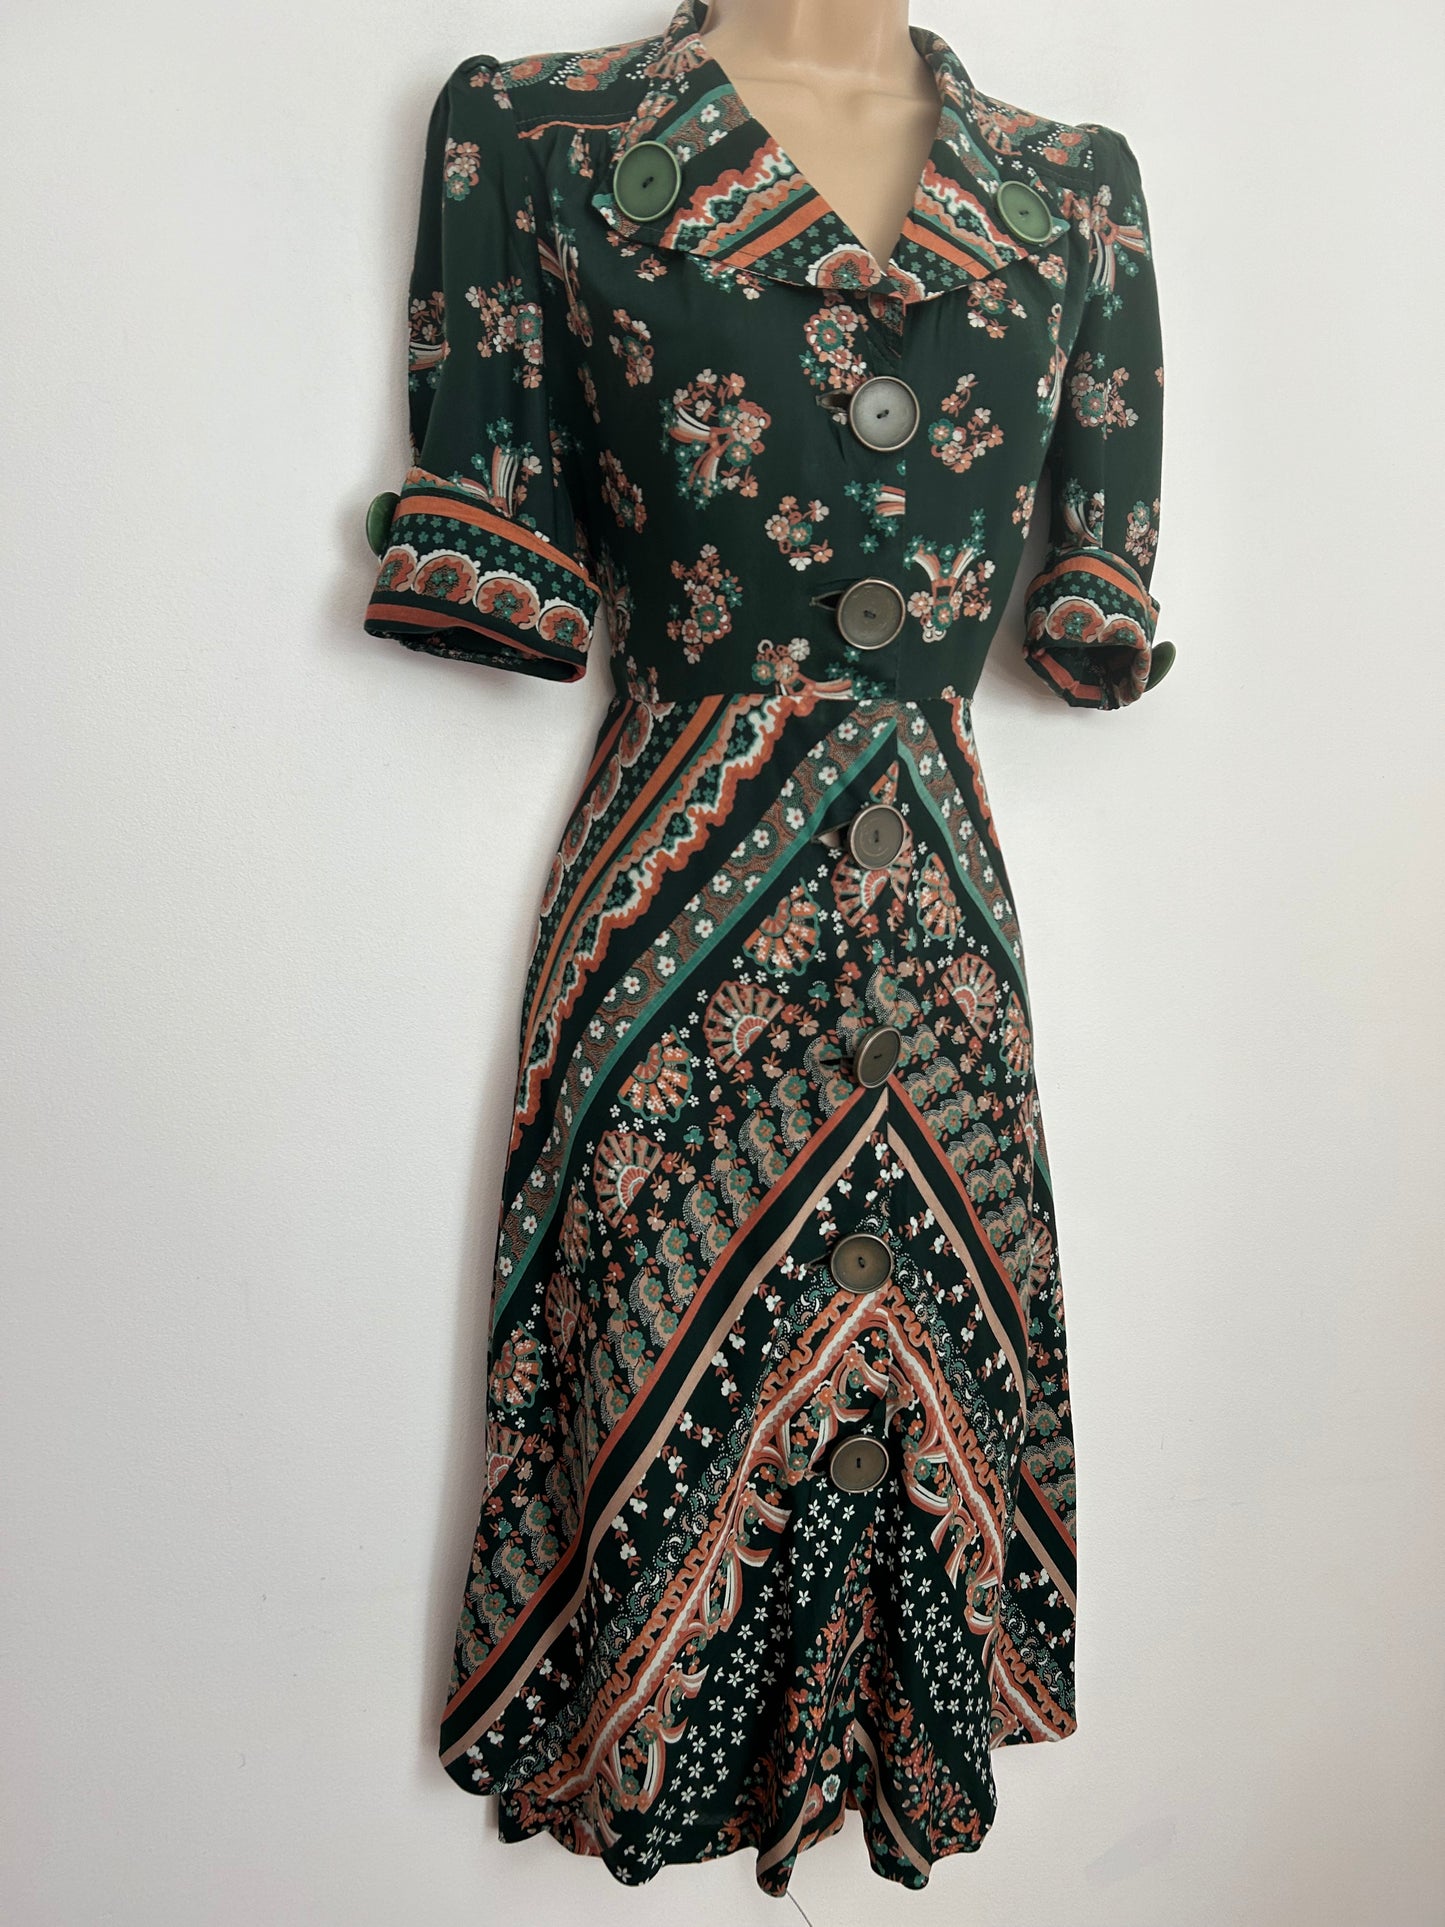 Vintage 1970s LOUIS CARING UK Size 10 Dark Green & Terracotta Floral Print Chunky Button Detail Fit & Flare Dress